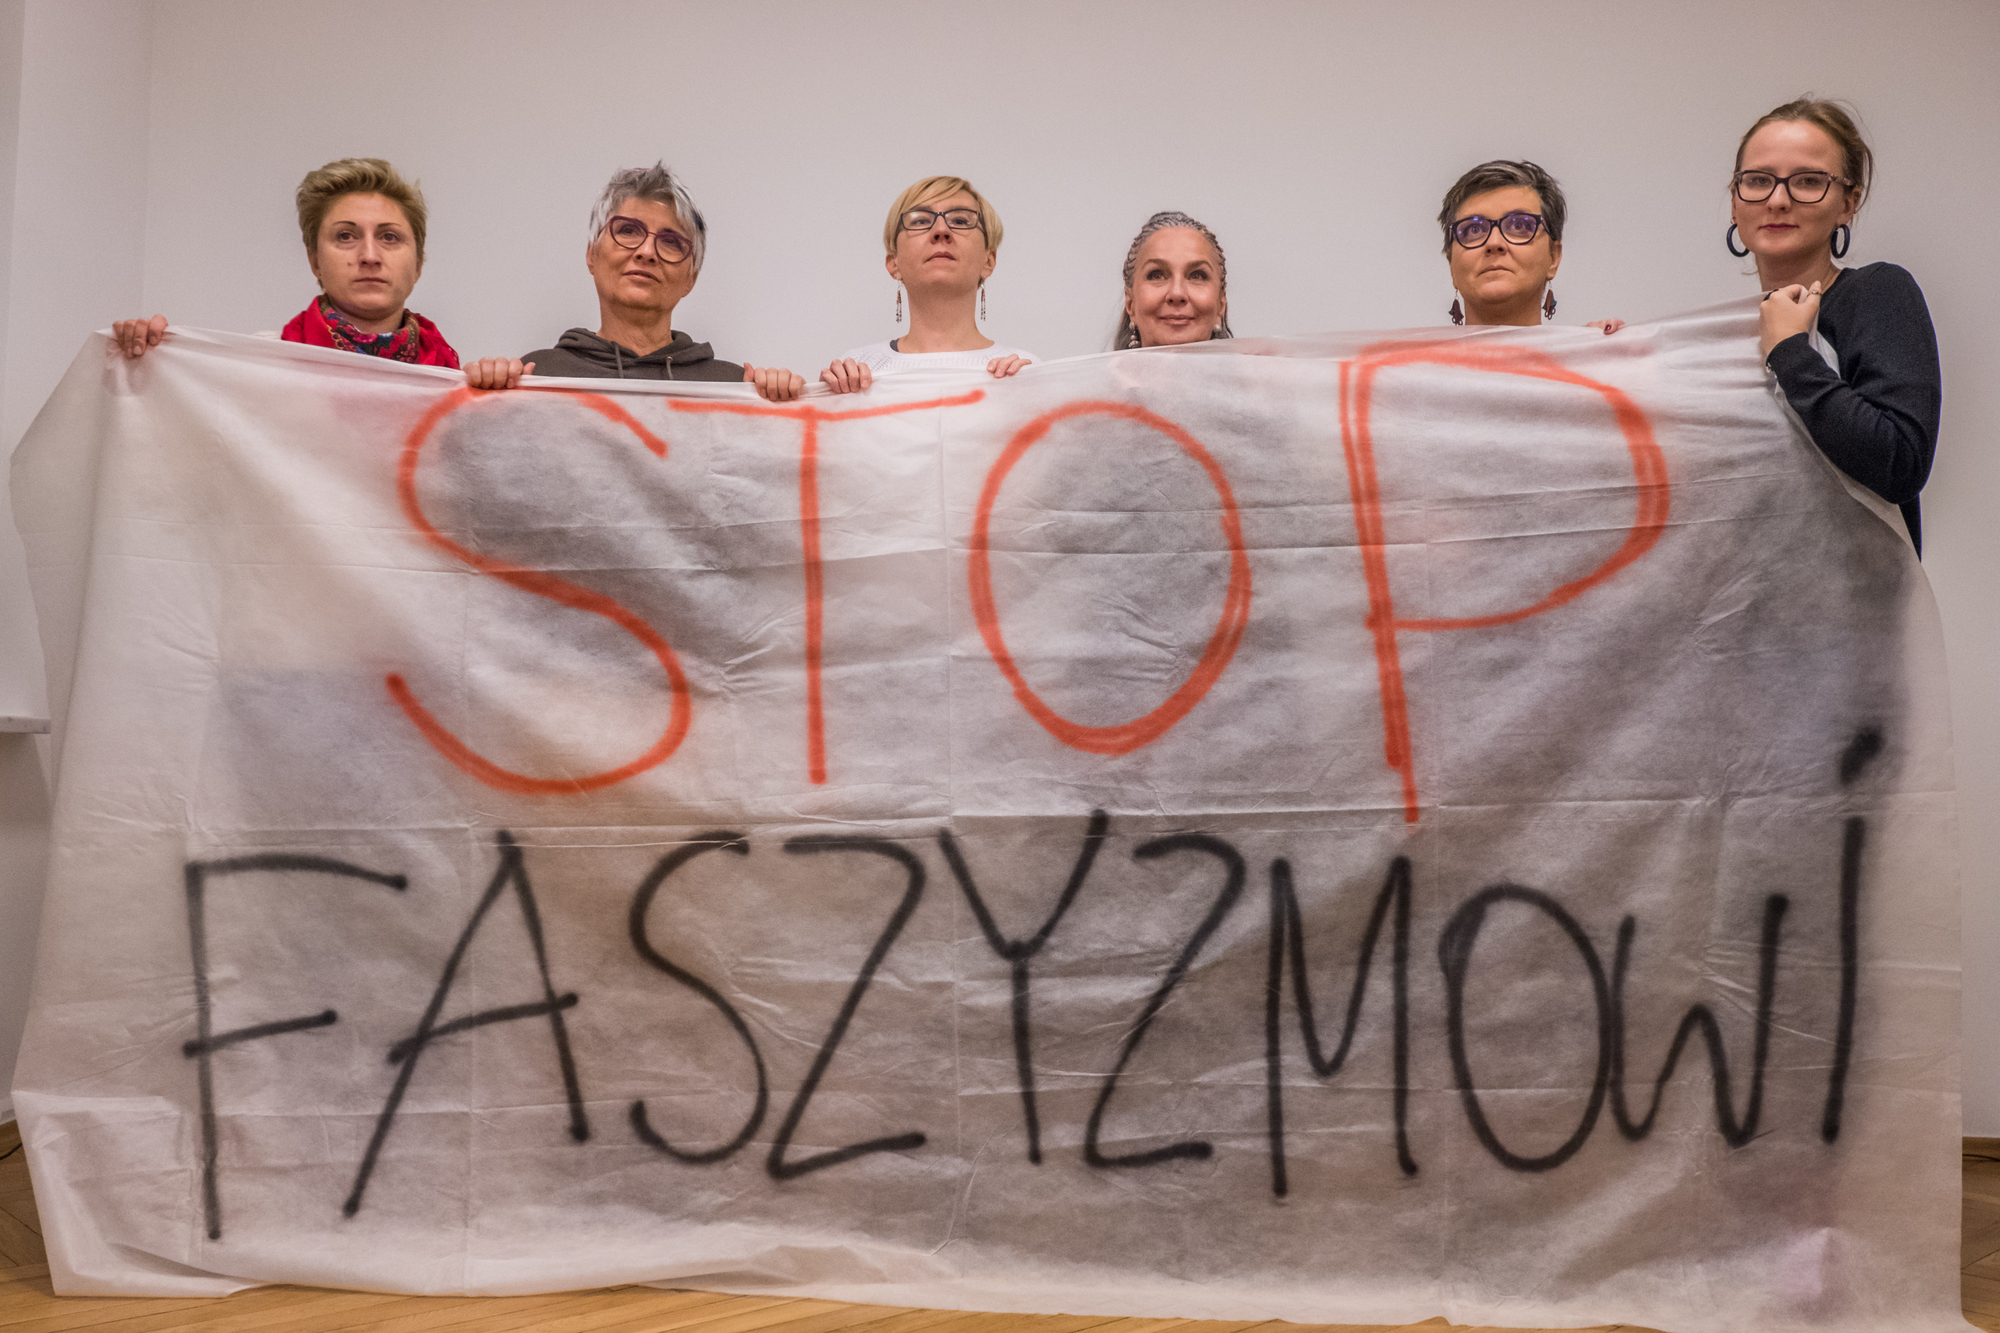 The day justice was finally served in Poland for vindicated anti-fascist campaigners